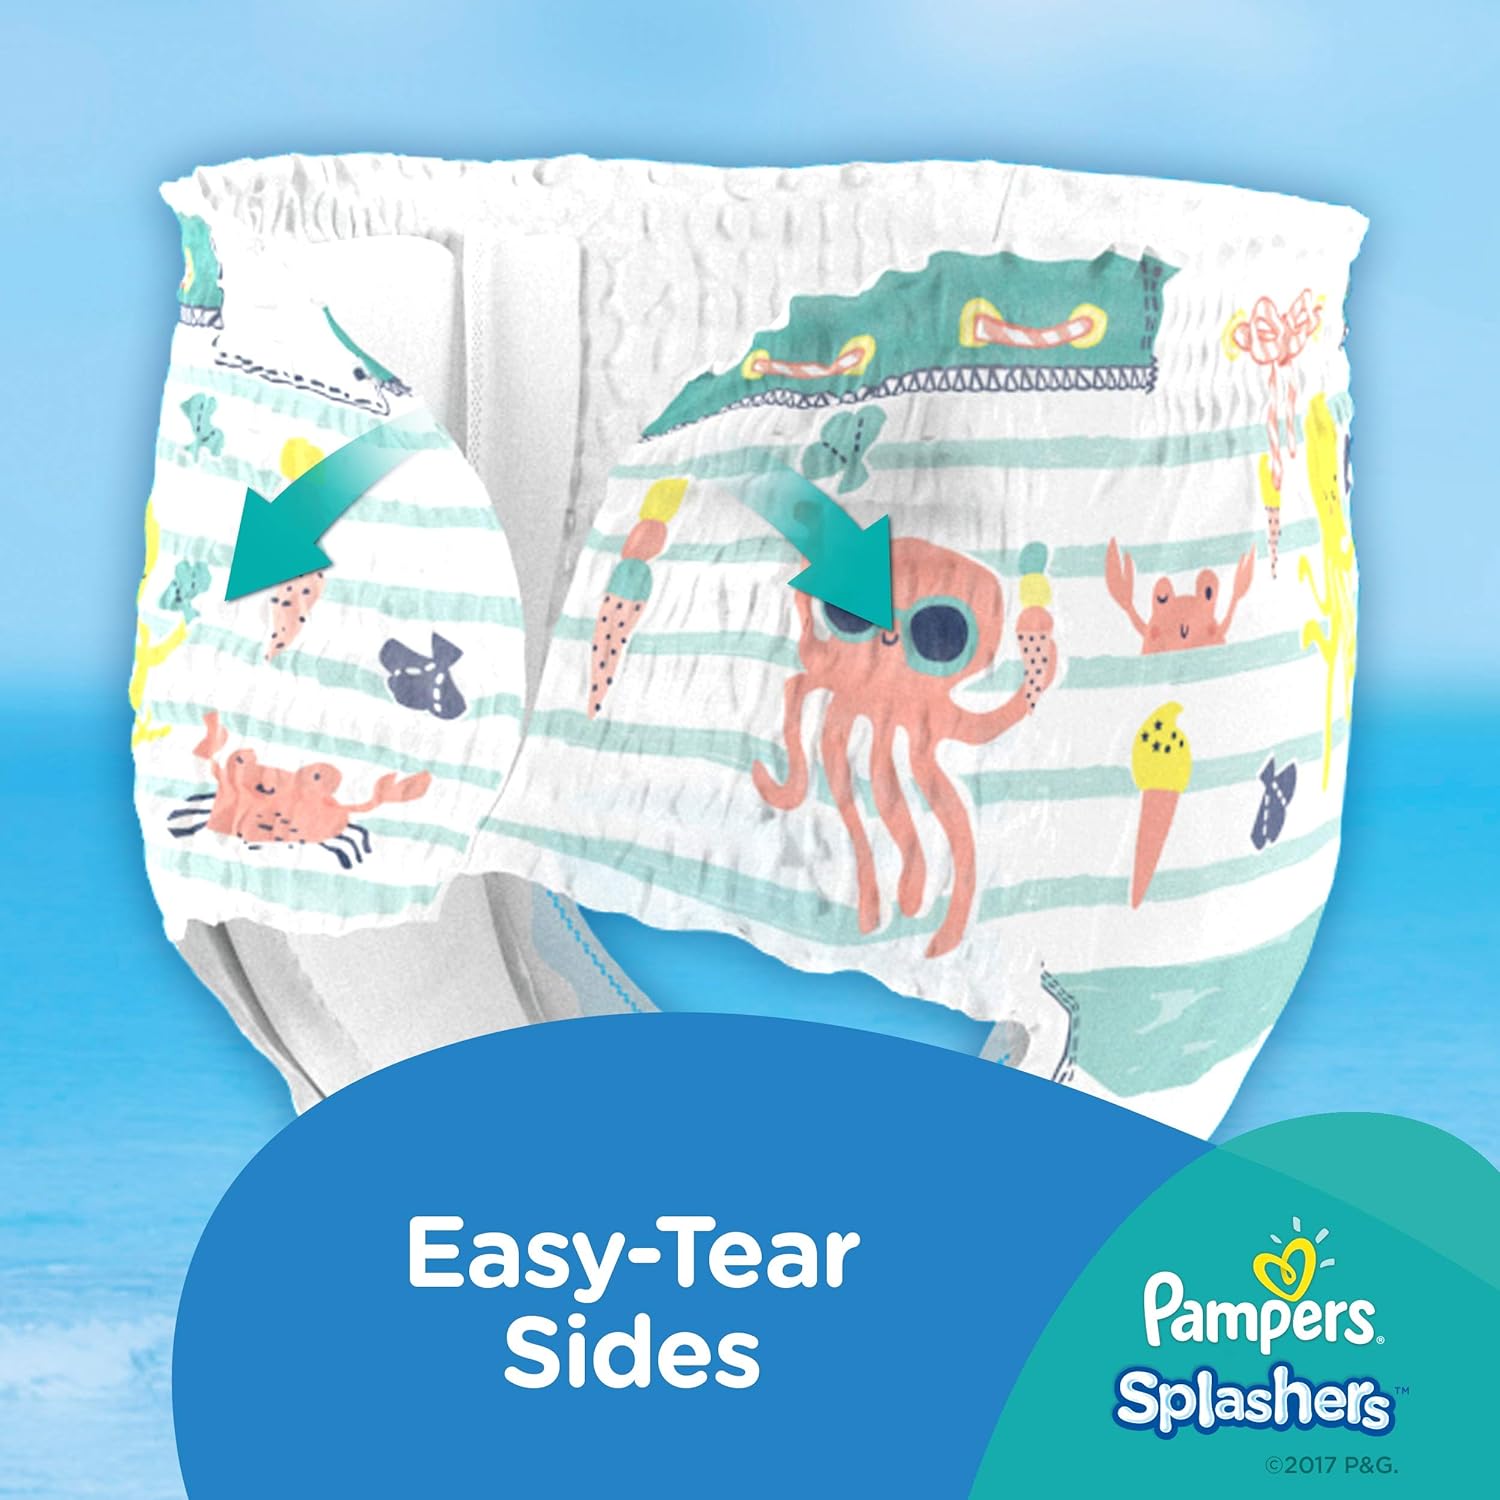 Pampers Splashers, Size 3-4, 6-12 kg, Carry Pack, 12 Swim Diaper Pants